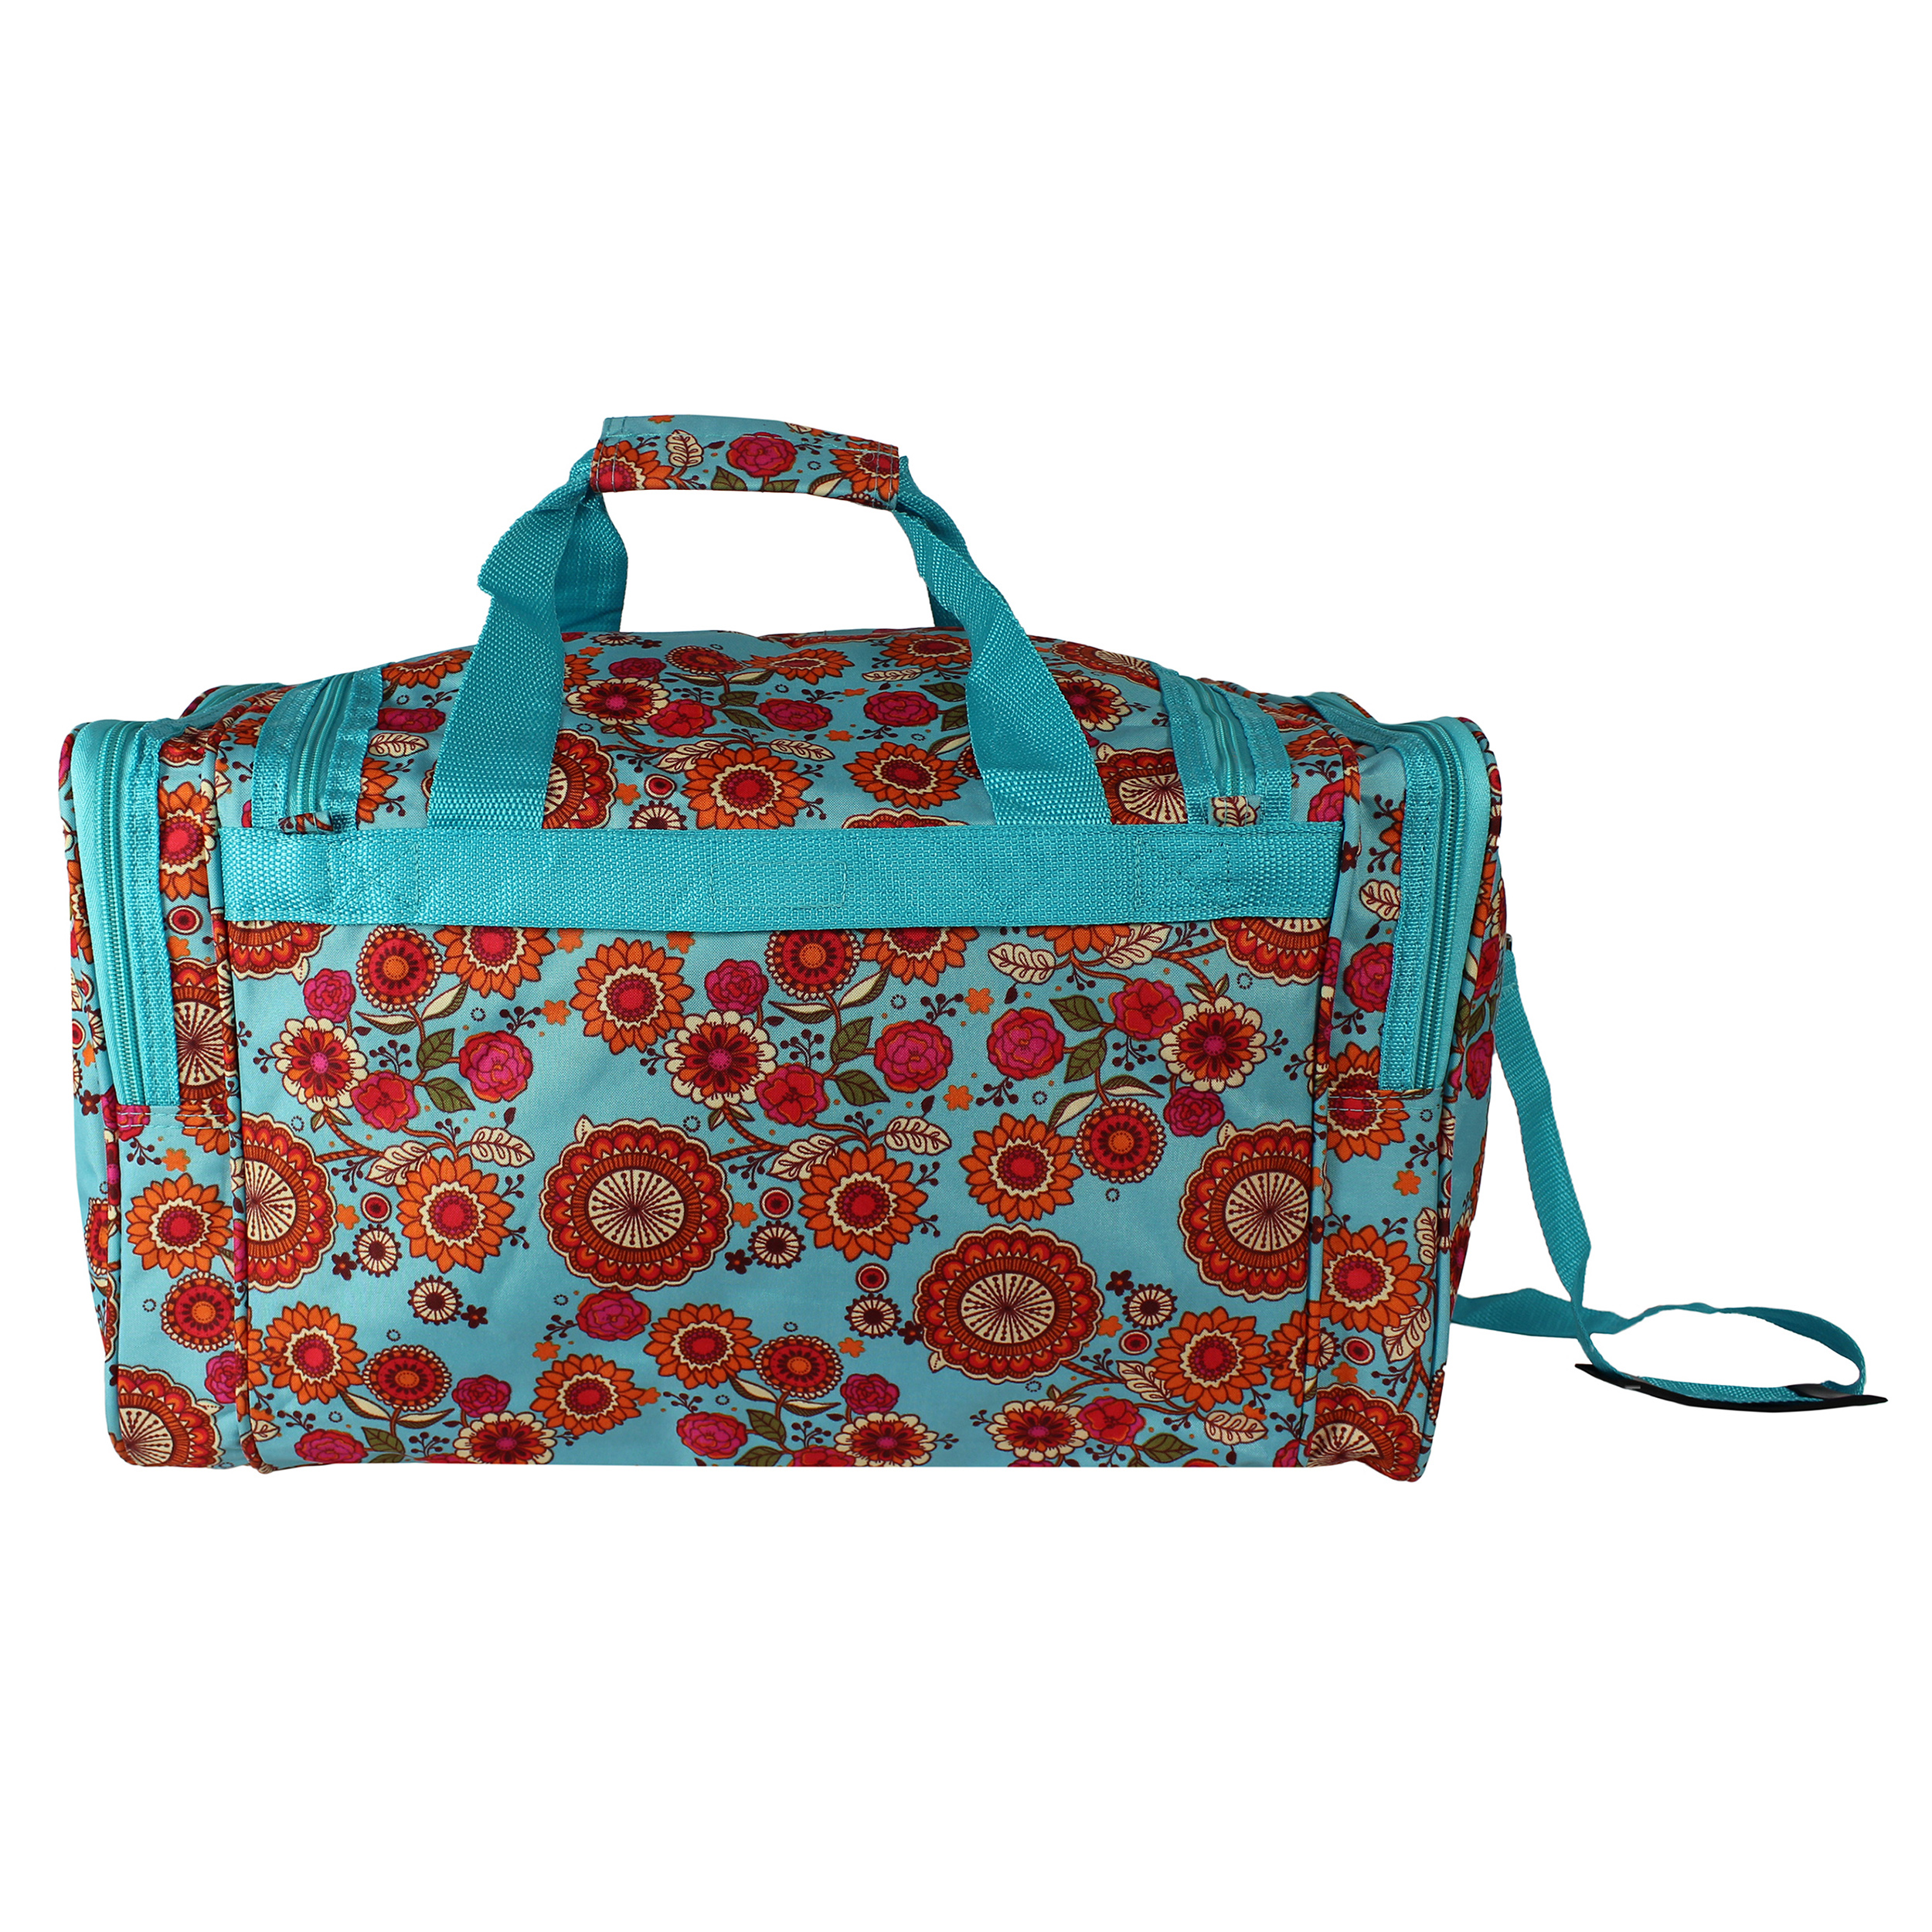 World Traveler 22-Inch Carry-On Duffel Bag - Wildflowers - image 2 of 2